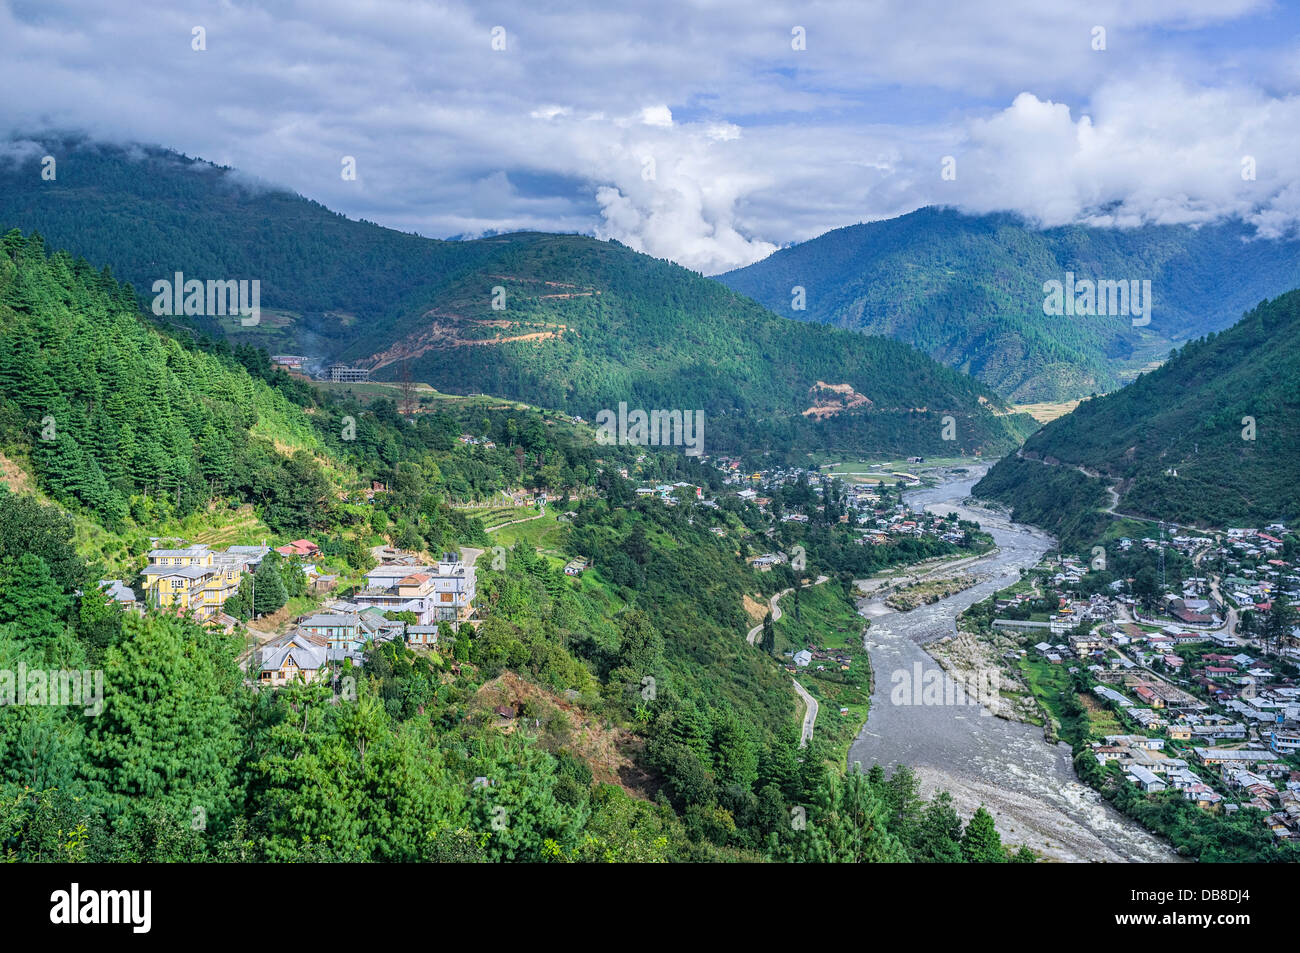 Dirang town deep in the valley of the high mountains with the Kameng river snaking through the region. Stock Photo